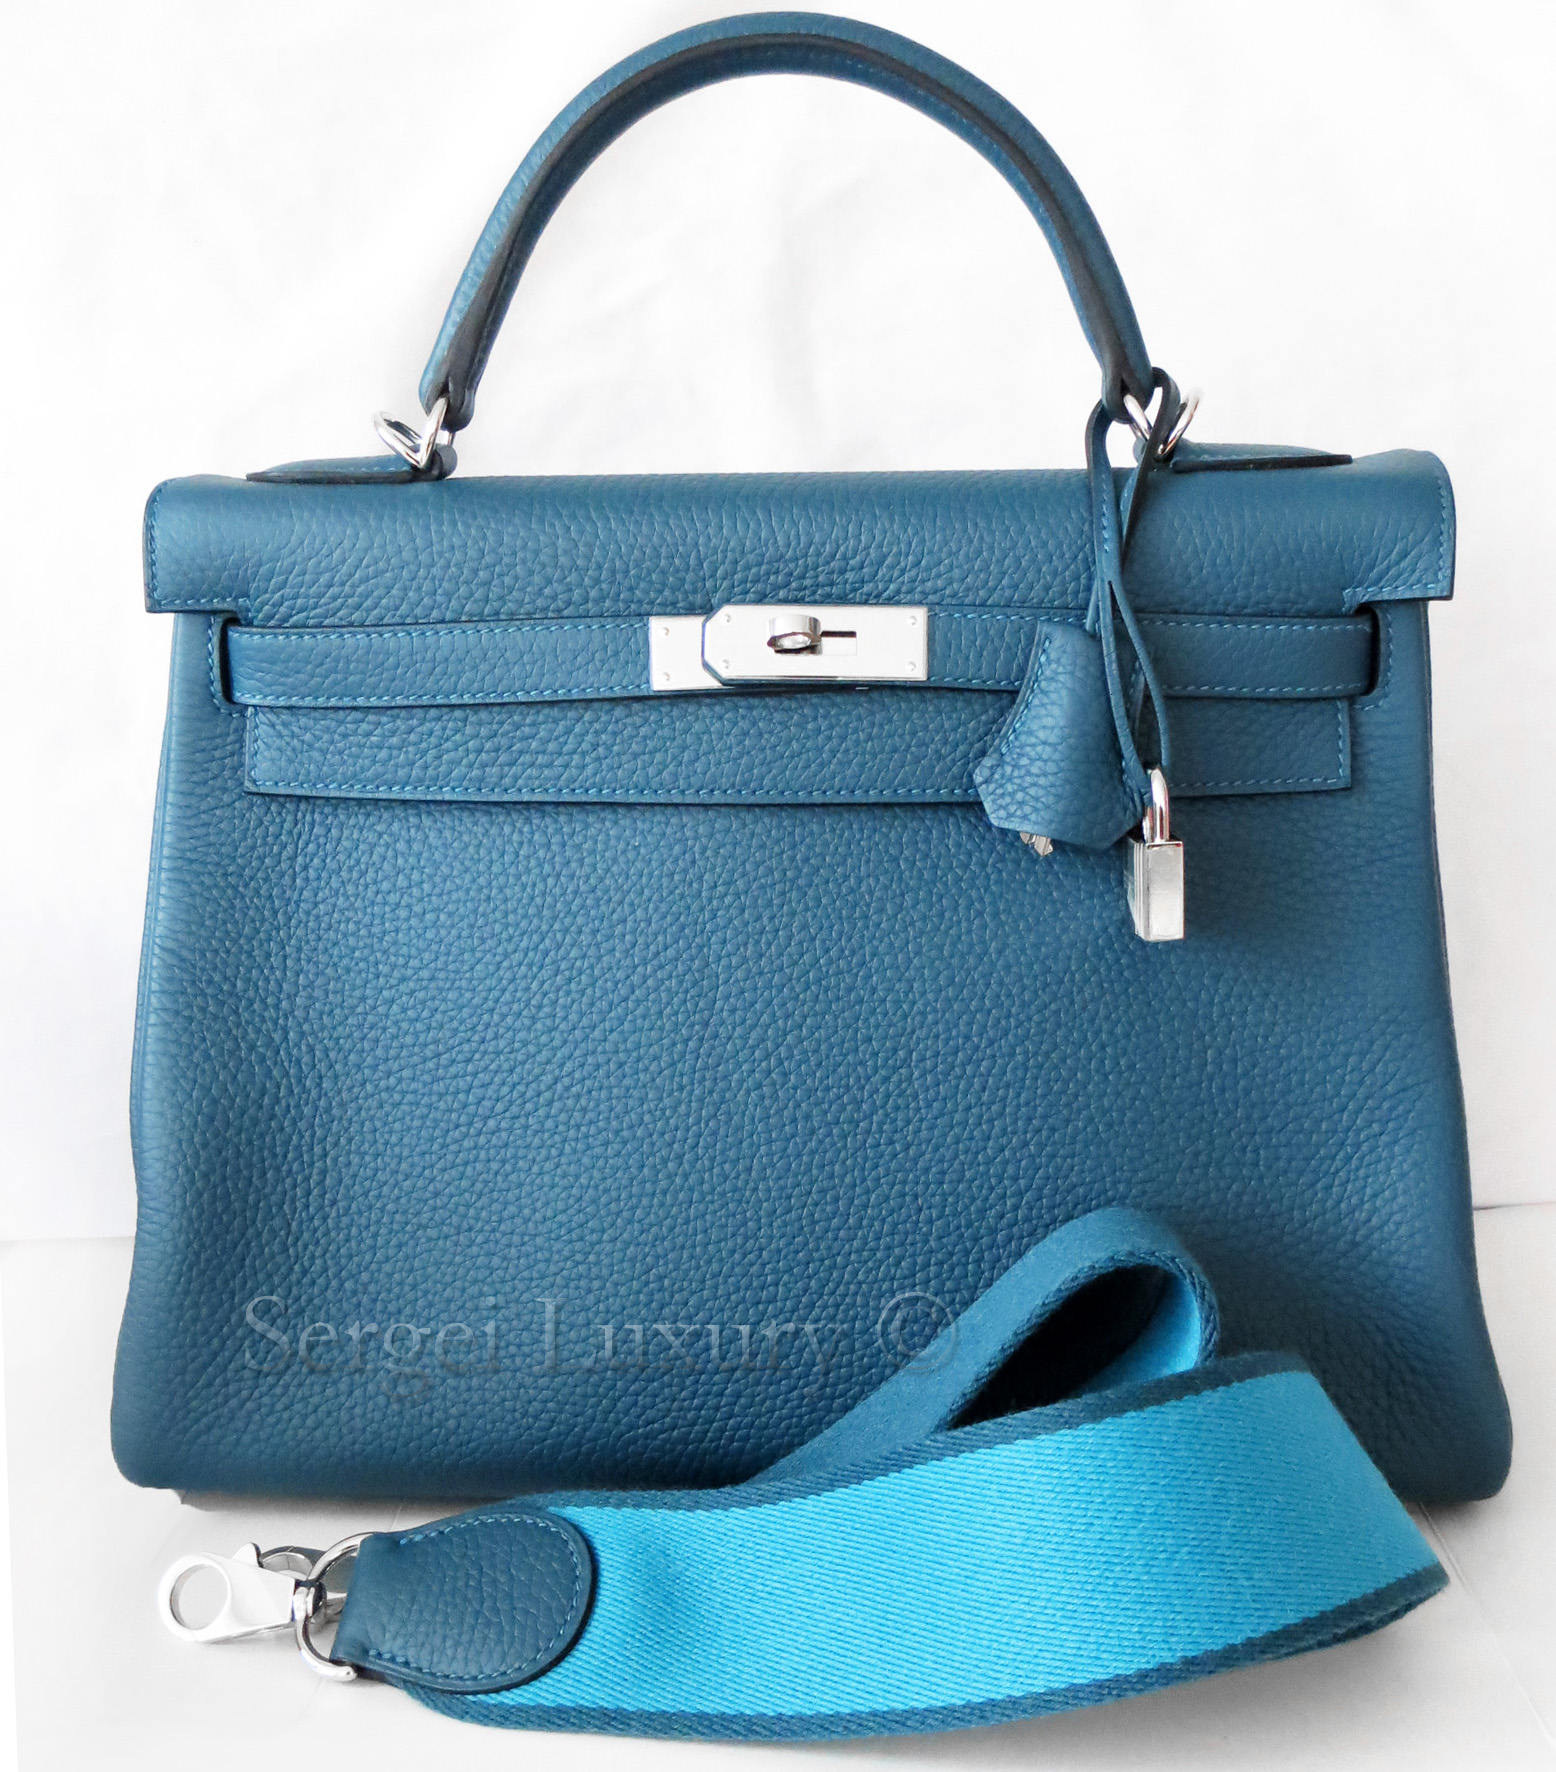 Chic NEW Authentic HERMES Blue Tempete 